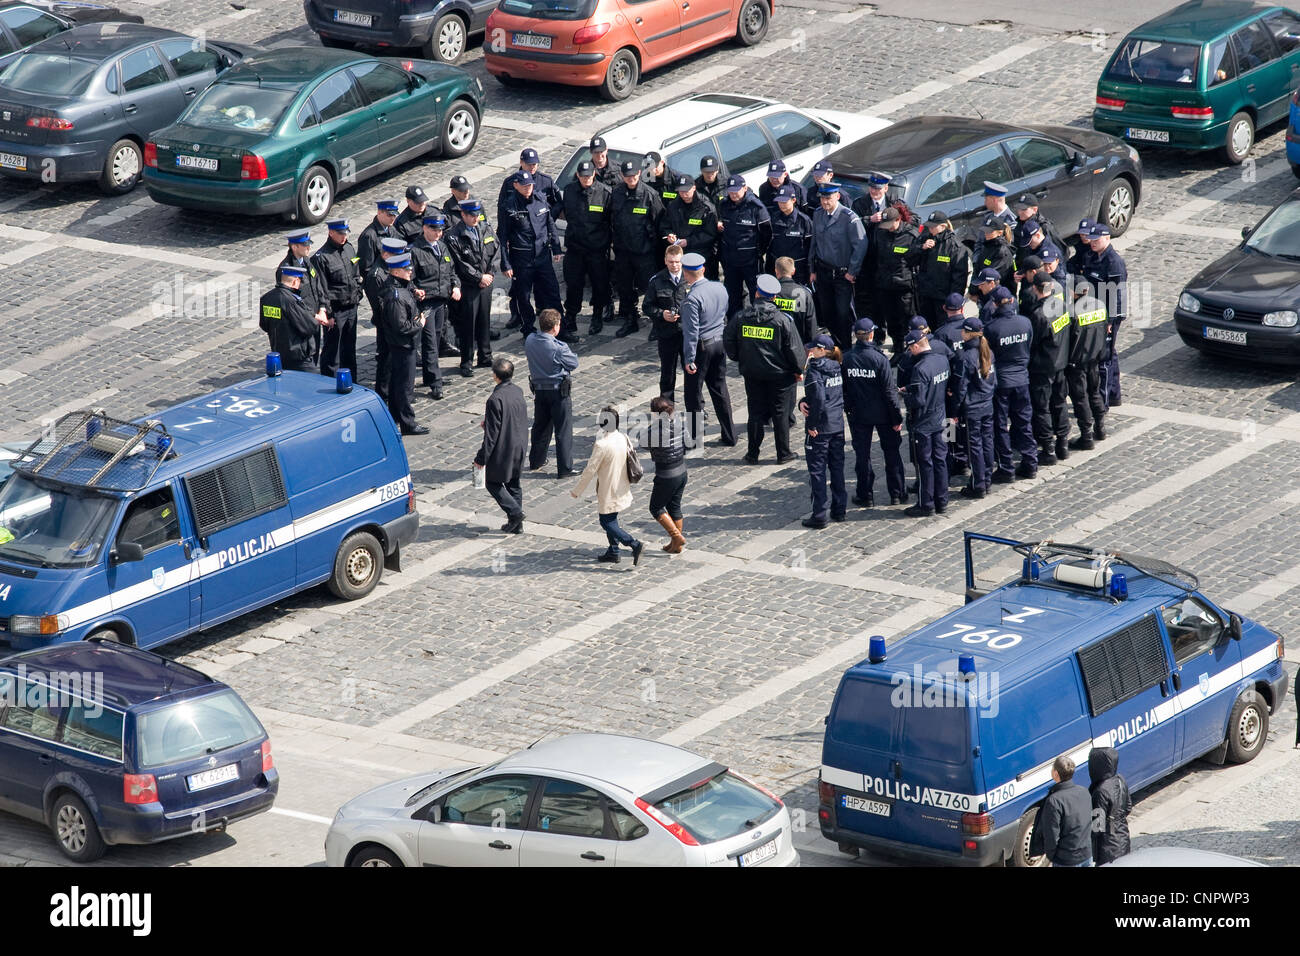 Polish police force gathering on a car park in Warsaw, Poland. Stock Photo